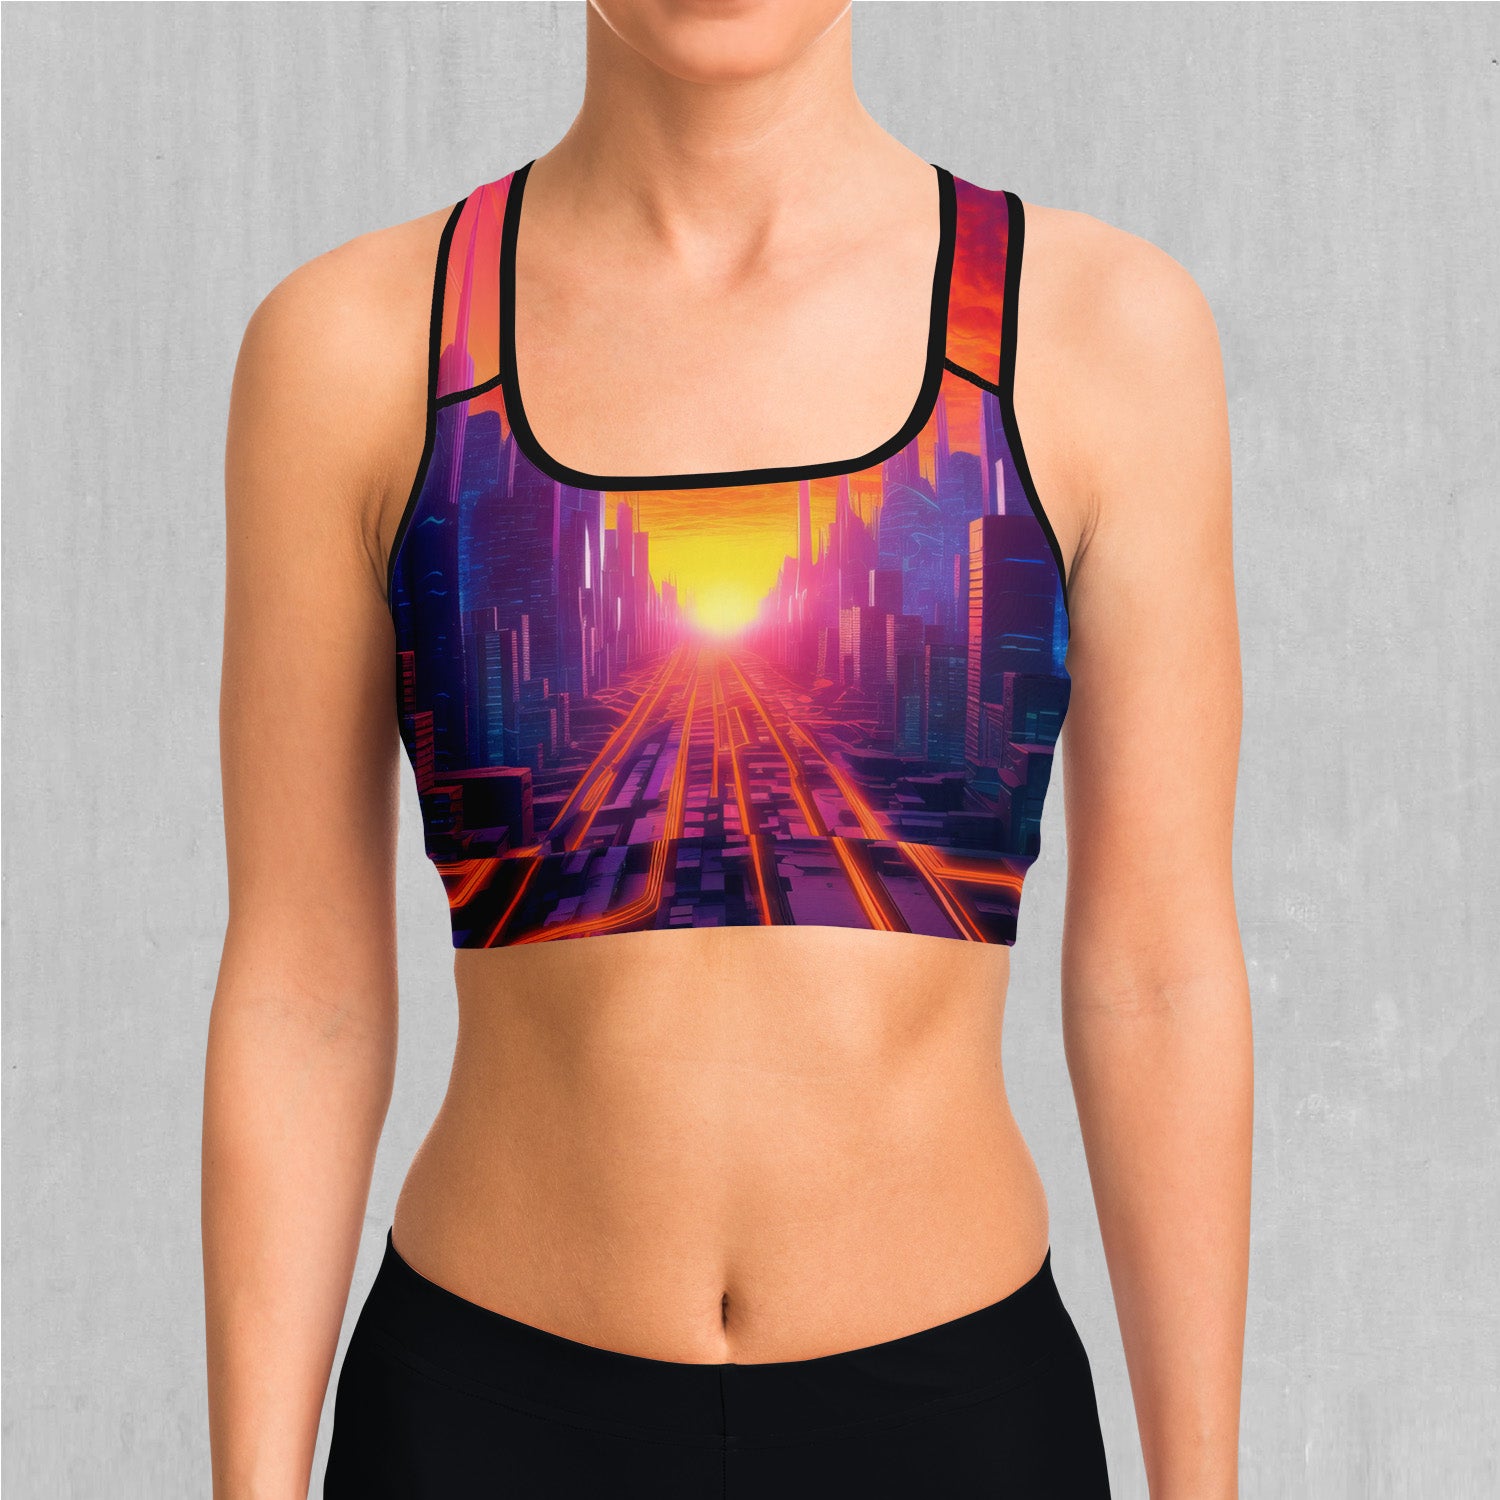 Rave Bras and Festival Bras - Azimuth Clothing